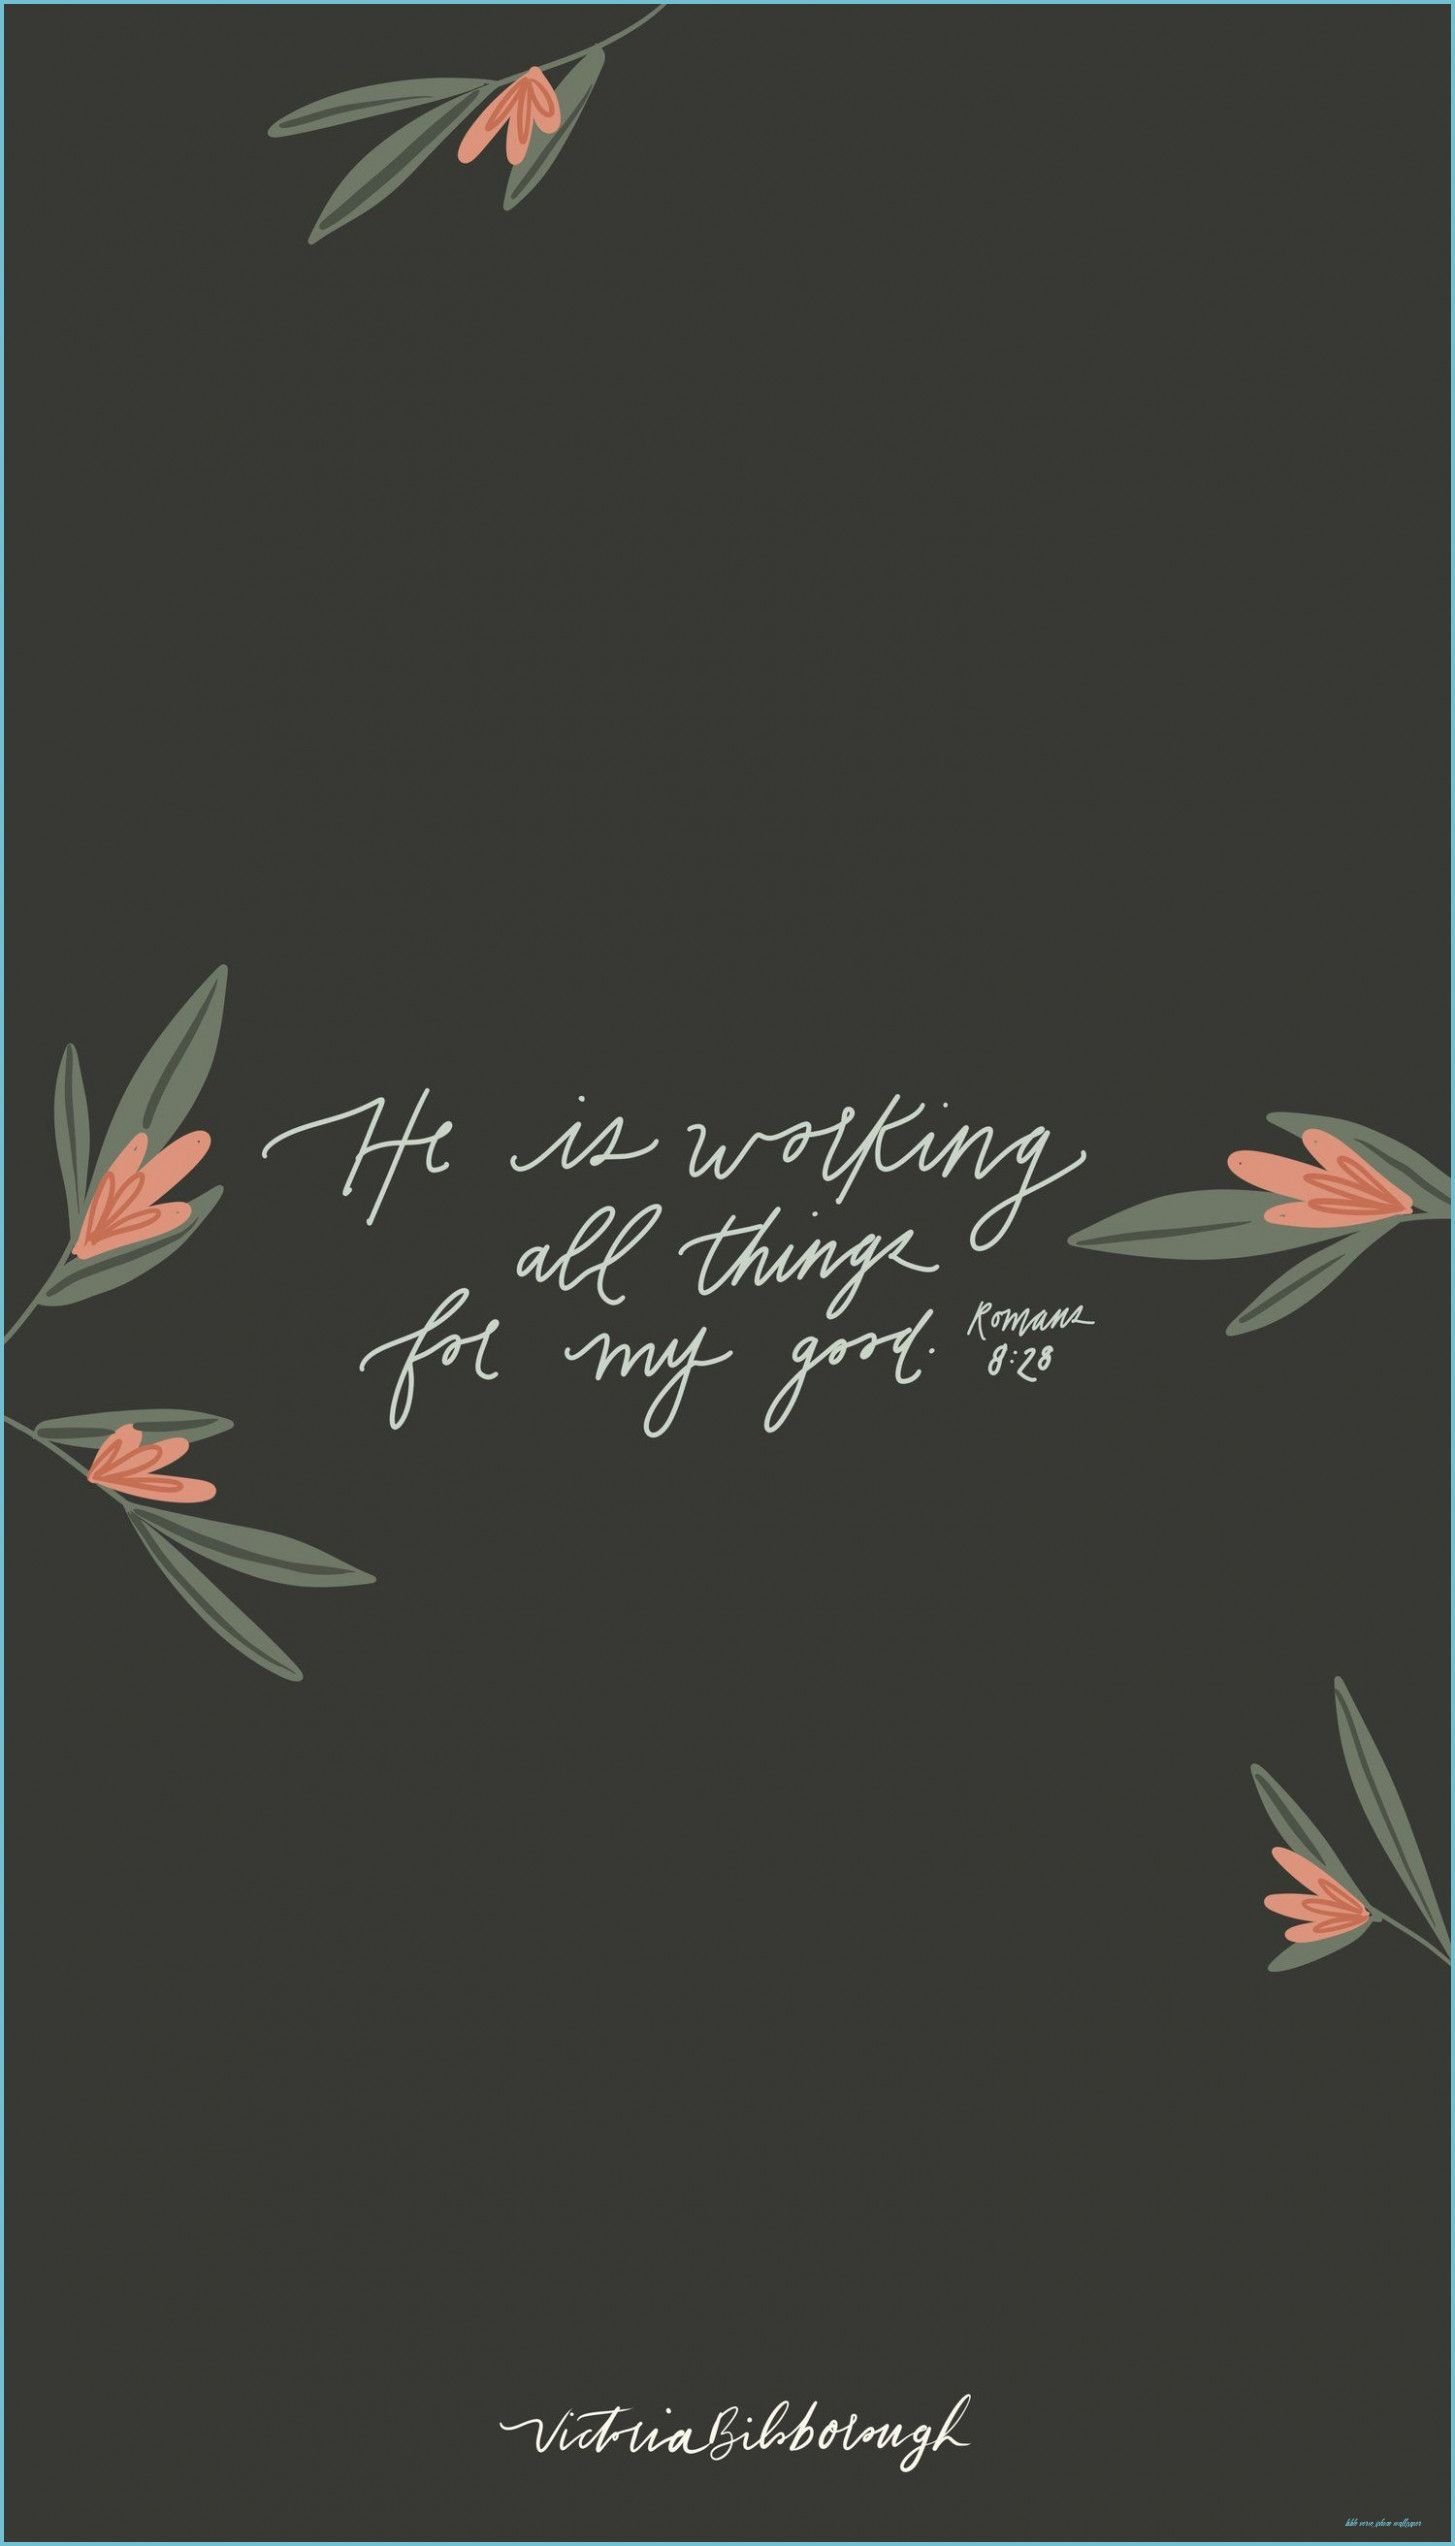 Happy New Year! Free Wallpaper [13] Bible quotes wallpaper verse iphone wallpaper